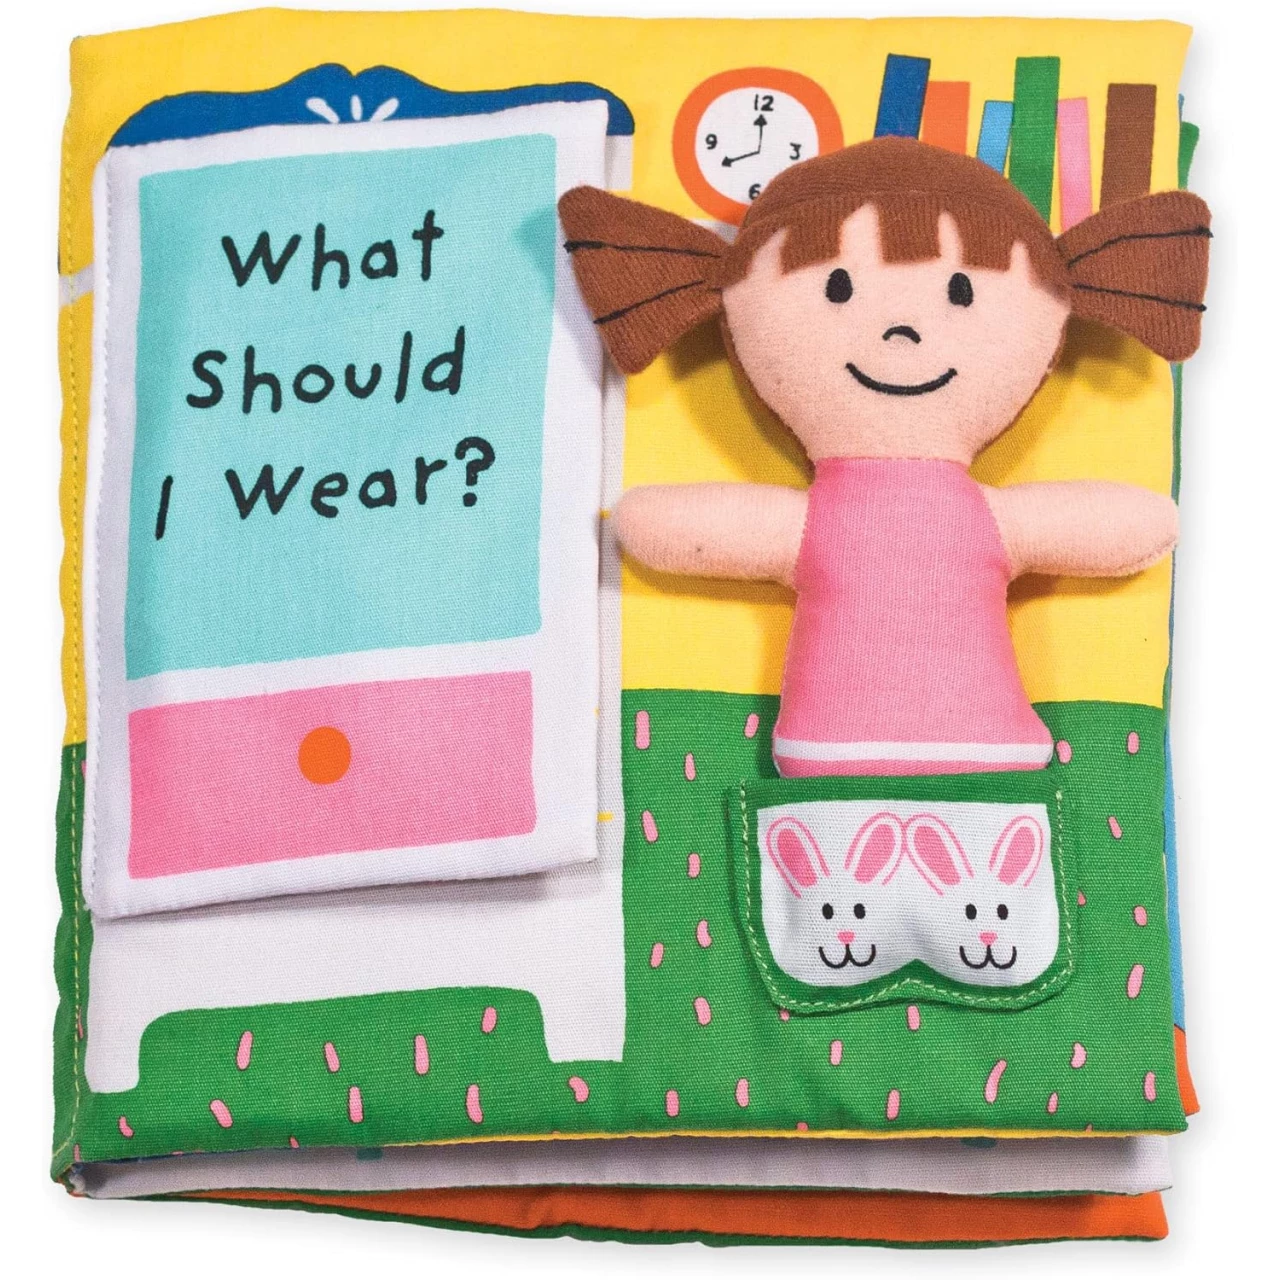 Melissa &amp; Doug Soft Activity Baby Book - What Should I Wear? - Sensory Travel Toys, Dress Up Doll For Babies And Toddlers